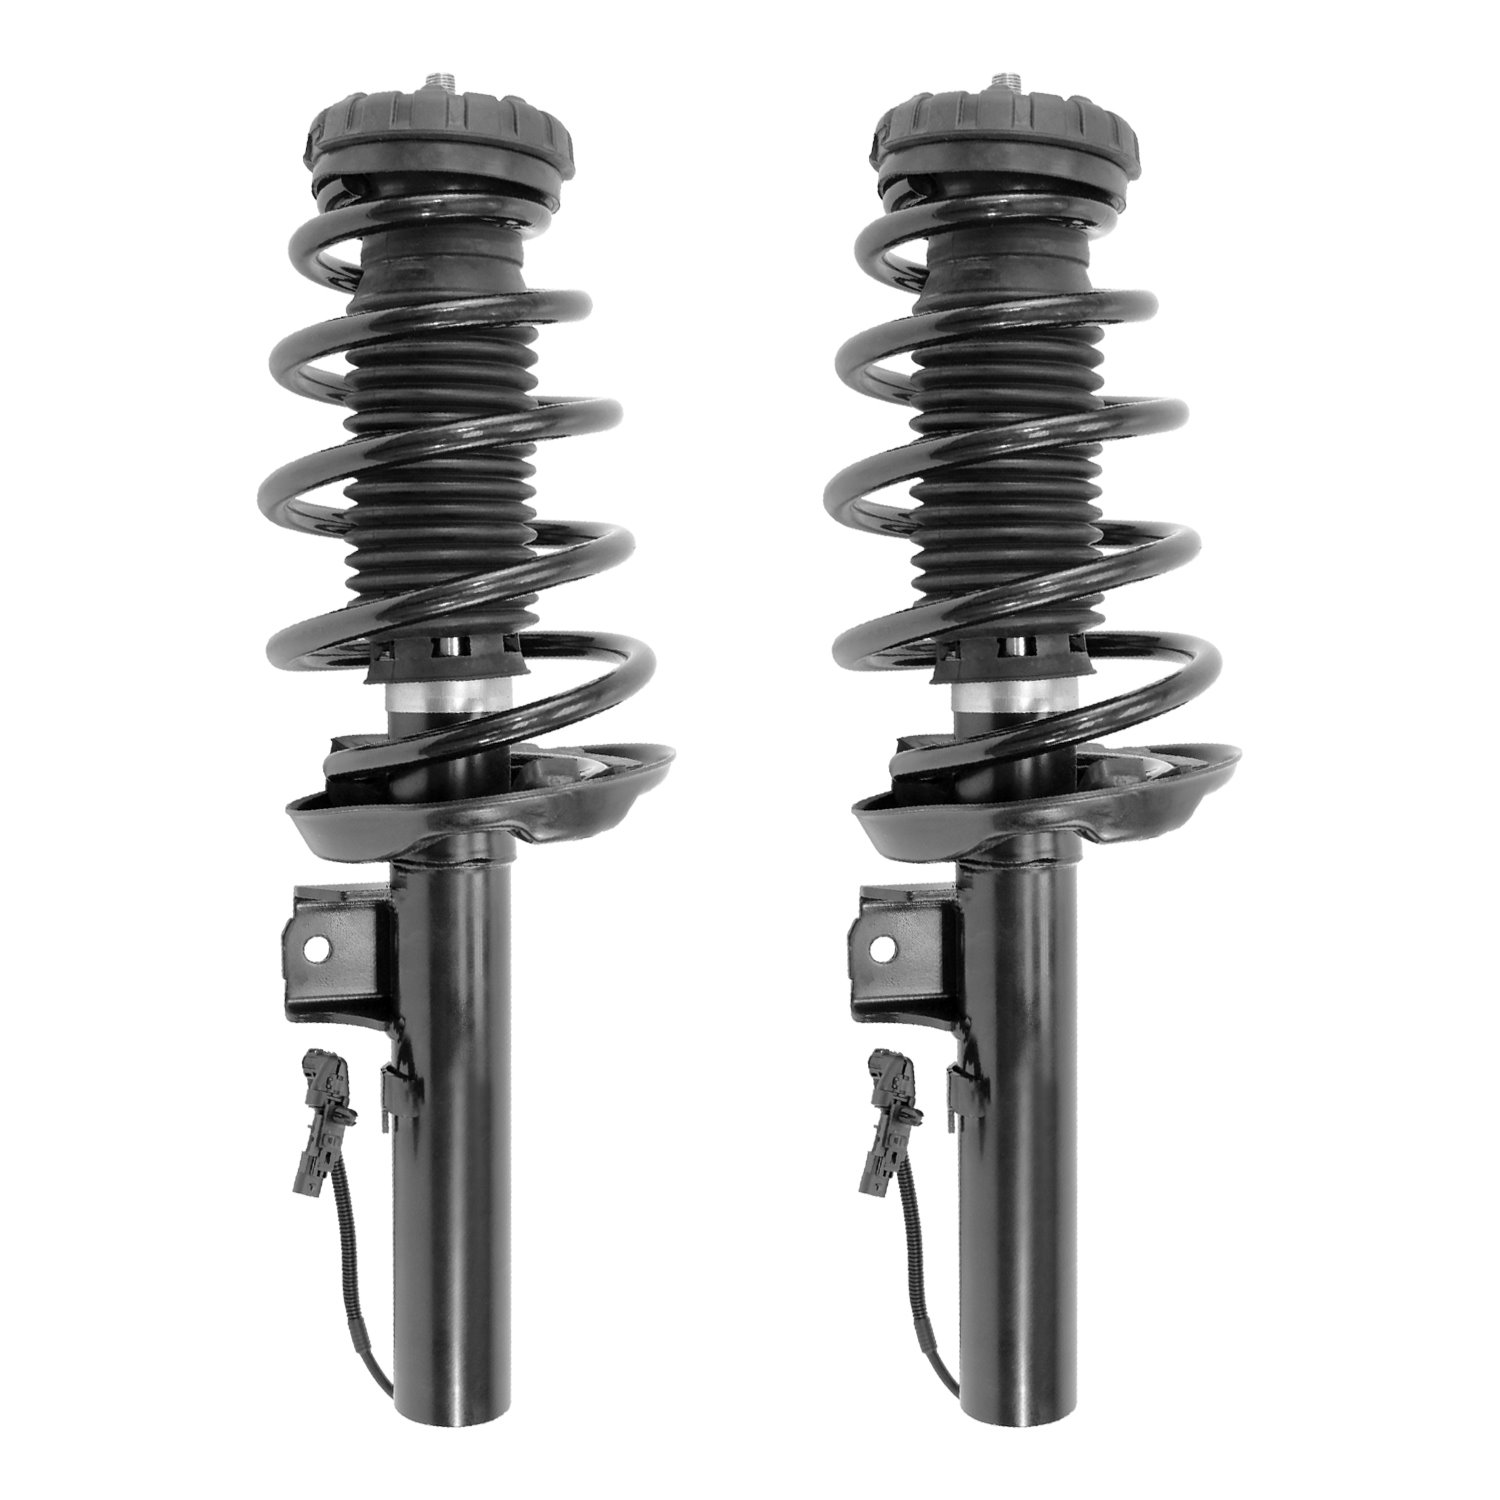 2-13470-001 Front Suspension Strut & Coil Spring Assemby Set Fits Select Cadillac XTS